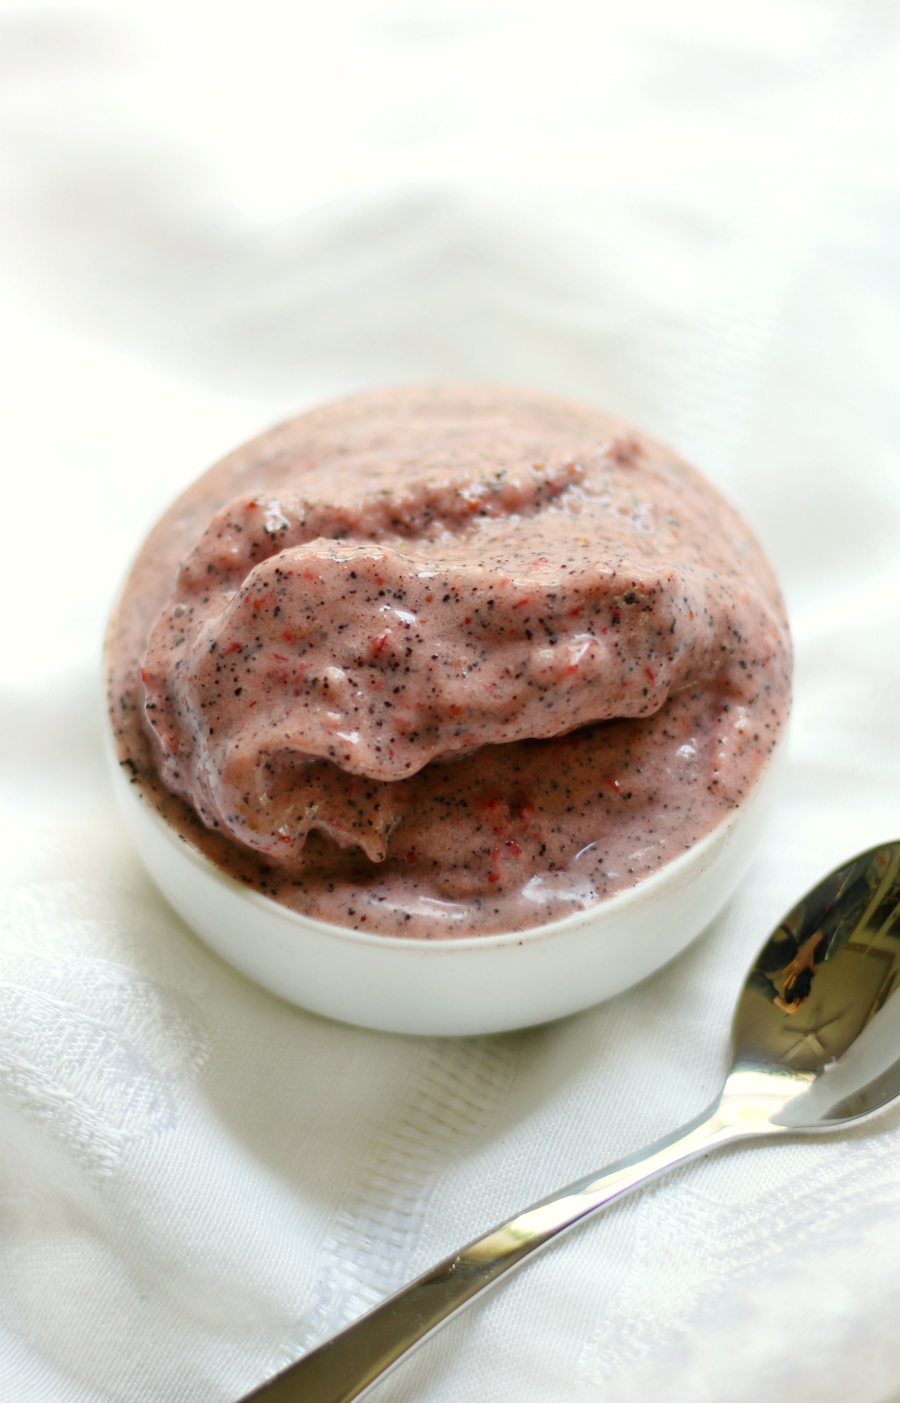 Strawberry Cappuccino Ice Cream | Strength and Sunshine @RebeccaGF666 A little sweet treat with a buzz! Strawberry Cappuccino Ice Cream that's just 3 ingredients, gluten-free, vegan, nut-free, paleo, and no bananas. A healthy and fun-flavored dessert you whip up right in your blender!